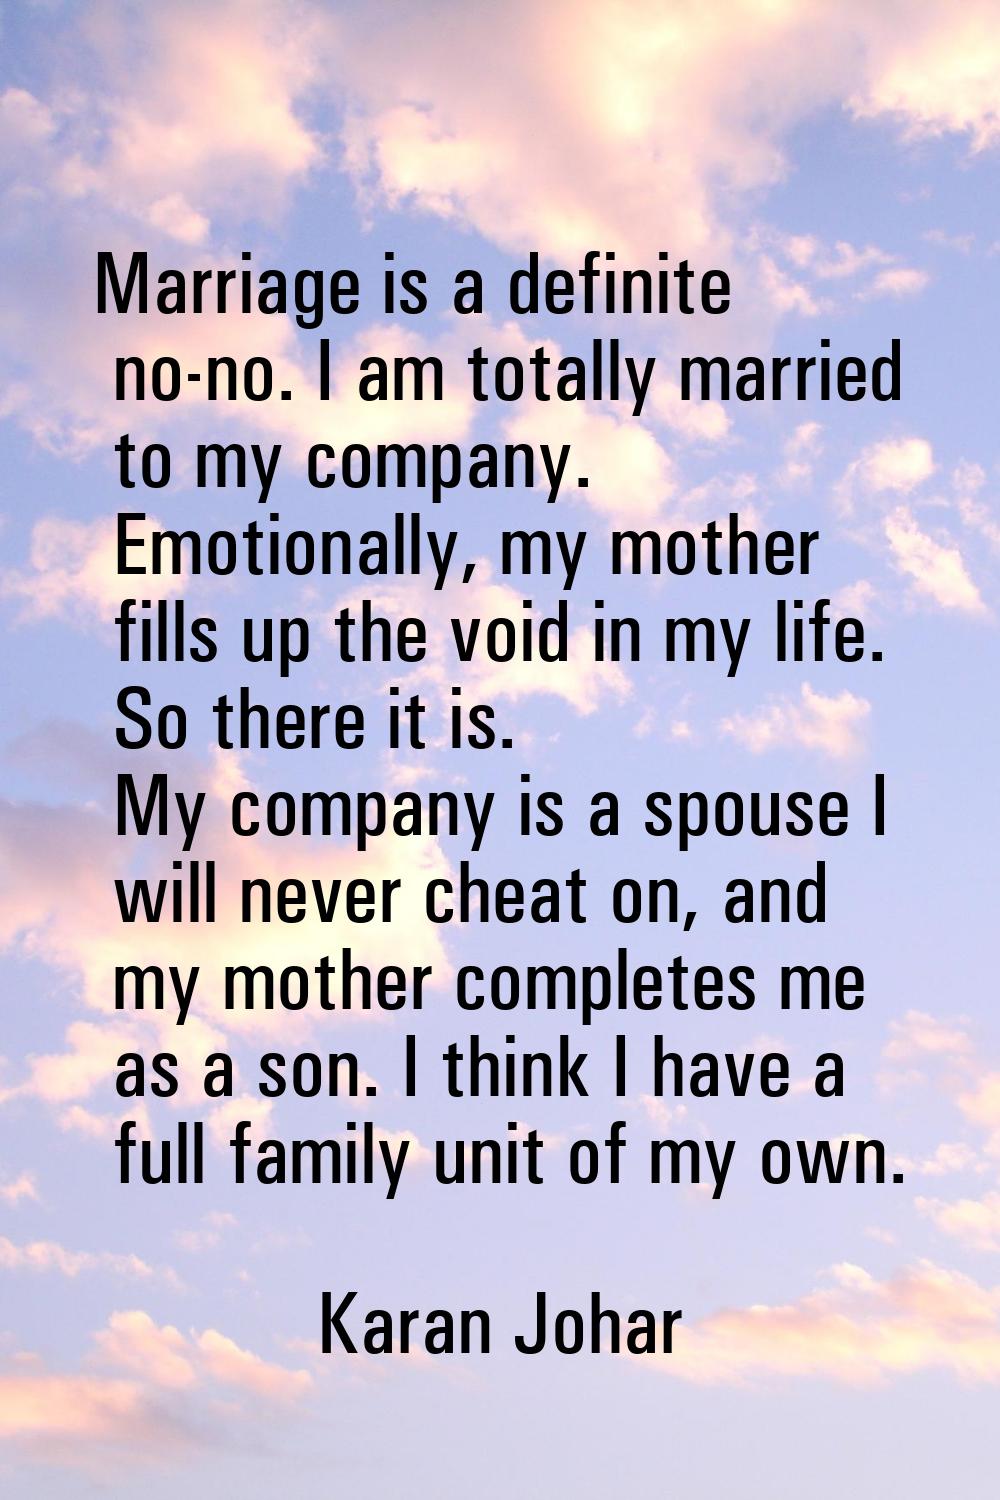 Marriage is a definite no-no. I am totally married to my company. Emotionally, my mother fills up t